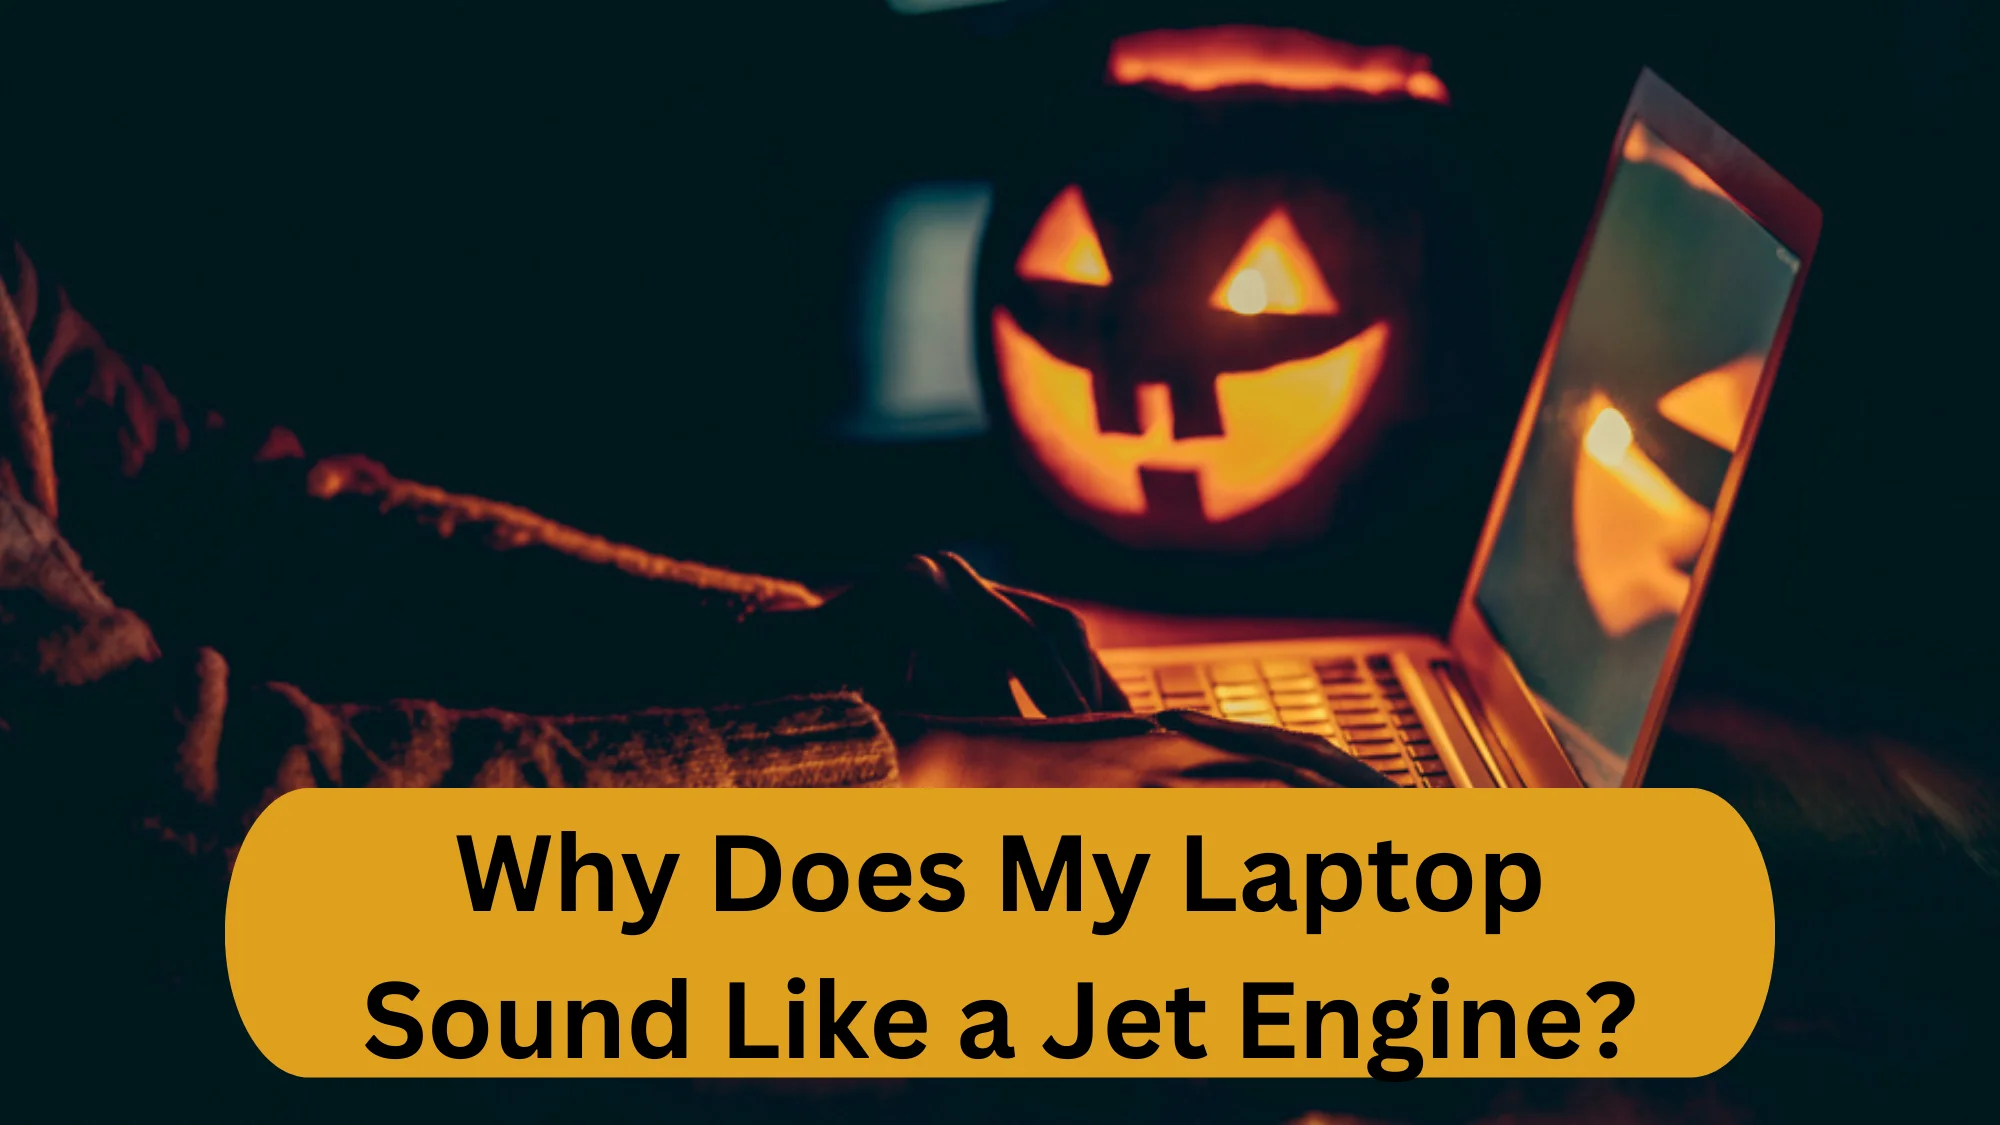 Why Does My Laptop Sound Like a Jet Engine